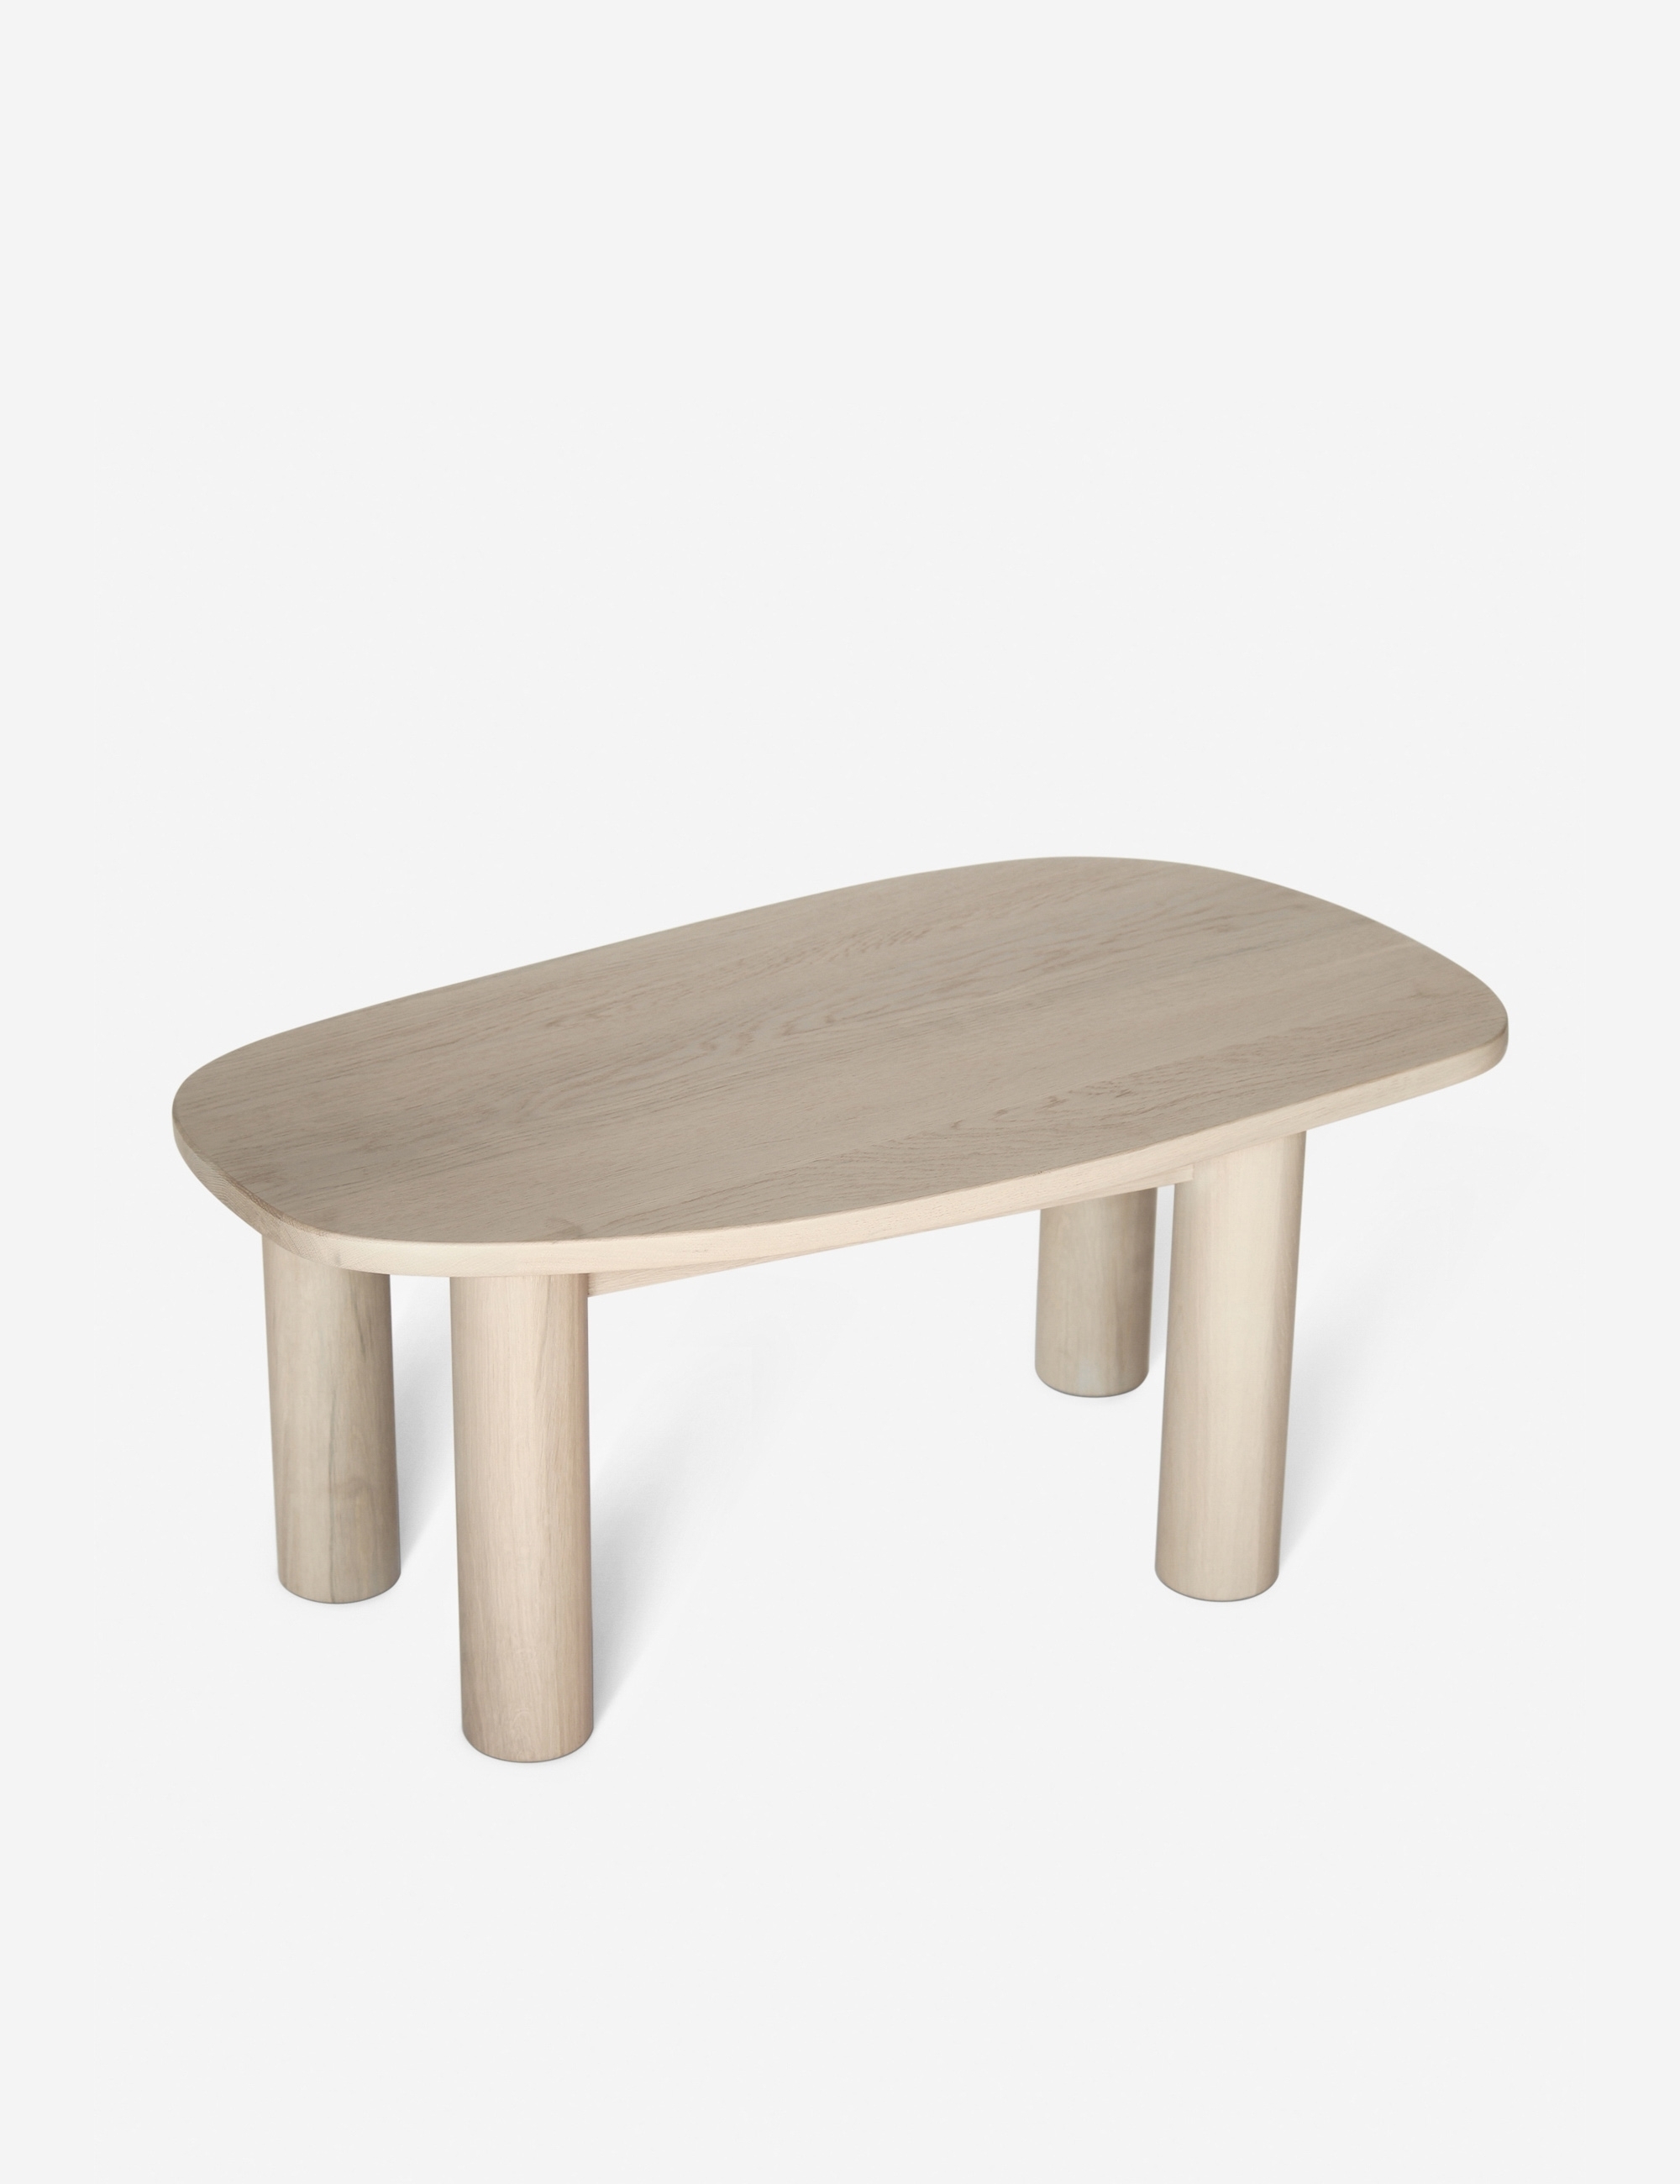 Ohm Coffee Table by Sun at Six - Image 1